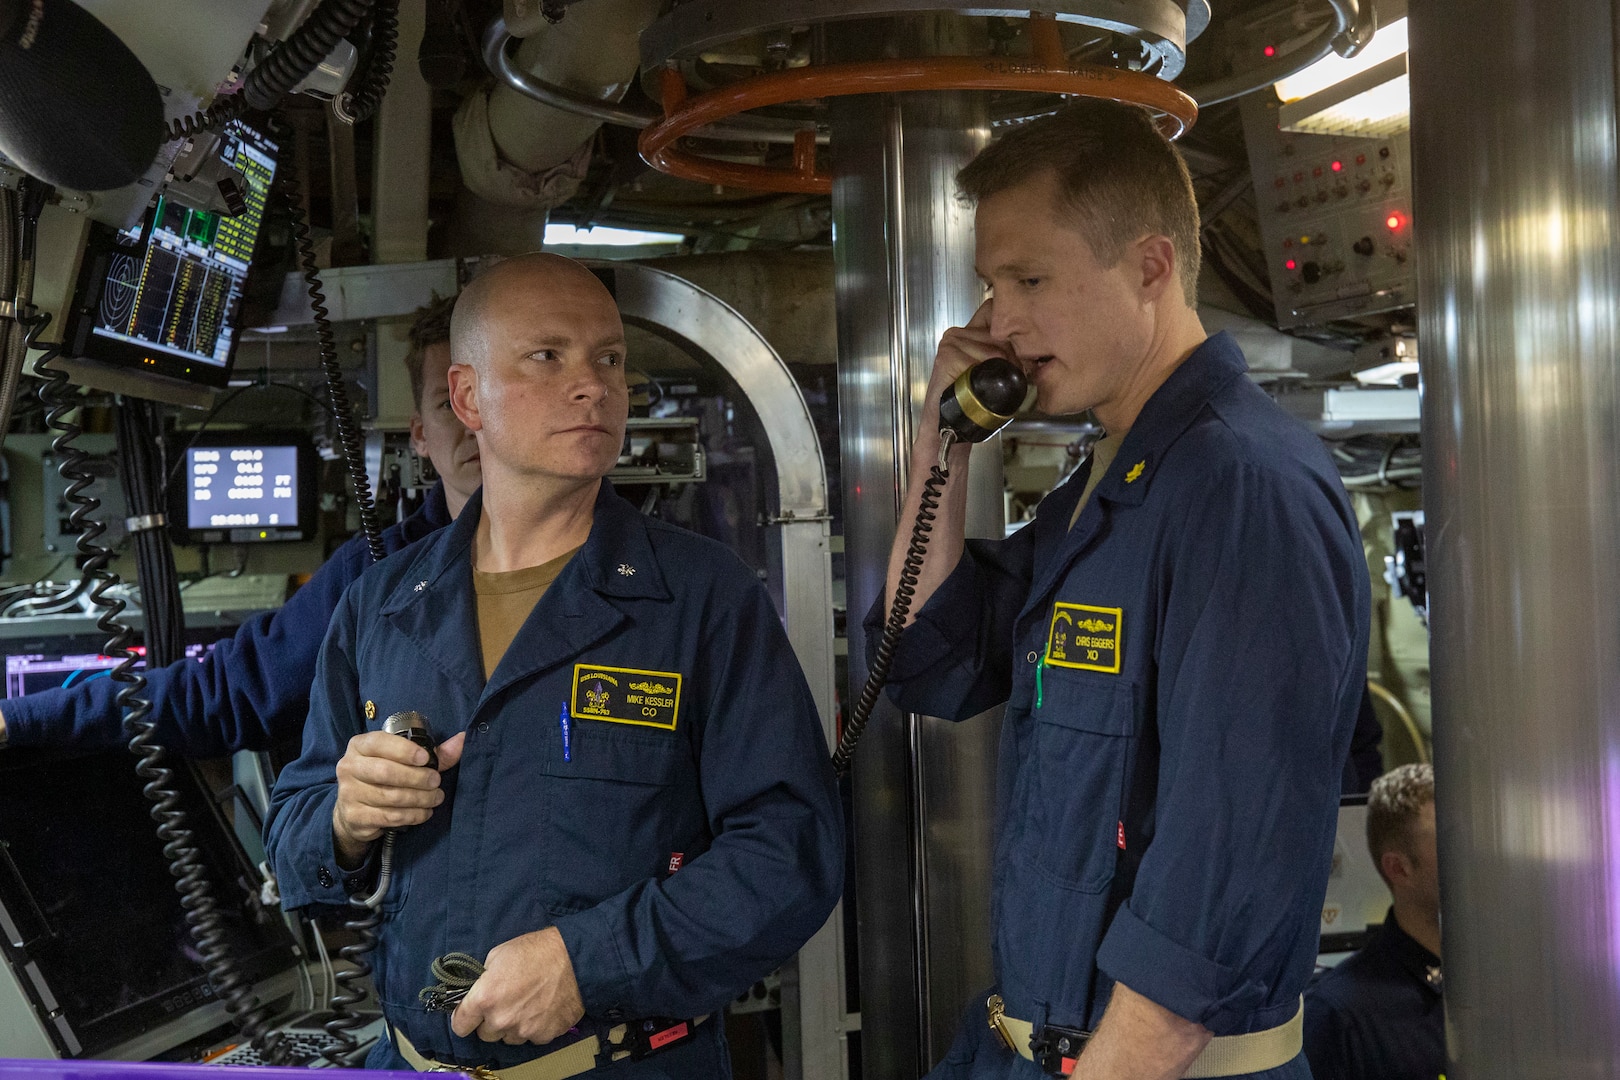 Photo depicts crew of Ohio-class ballistic missile submarine USS Louisiana (SSBN 743) during Demonstration and Shakedown Operation-32 (DASO-32) demonstrating launching procedures for visitors aboard the submarine. Two crew members stand side by side using communications tools.